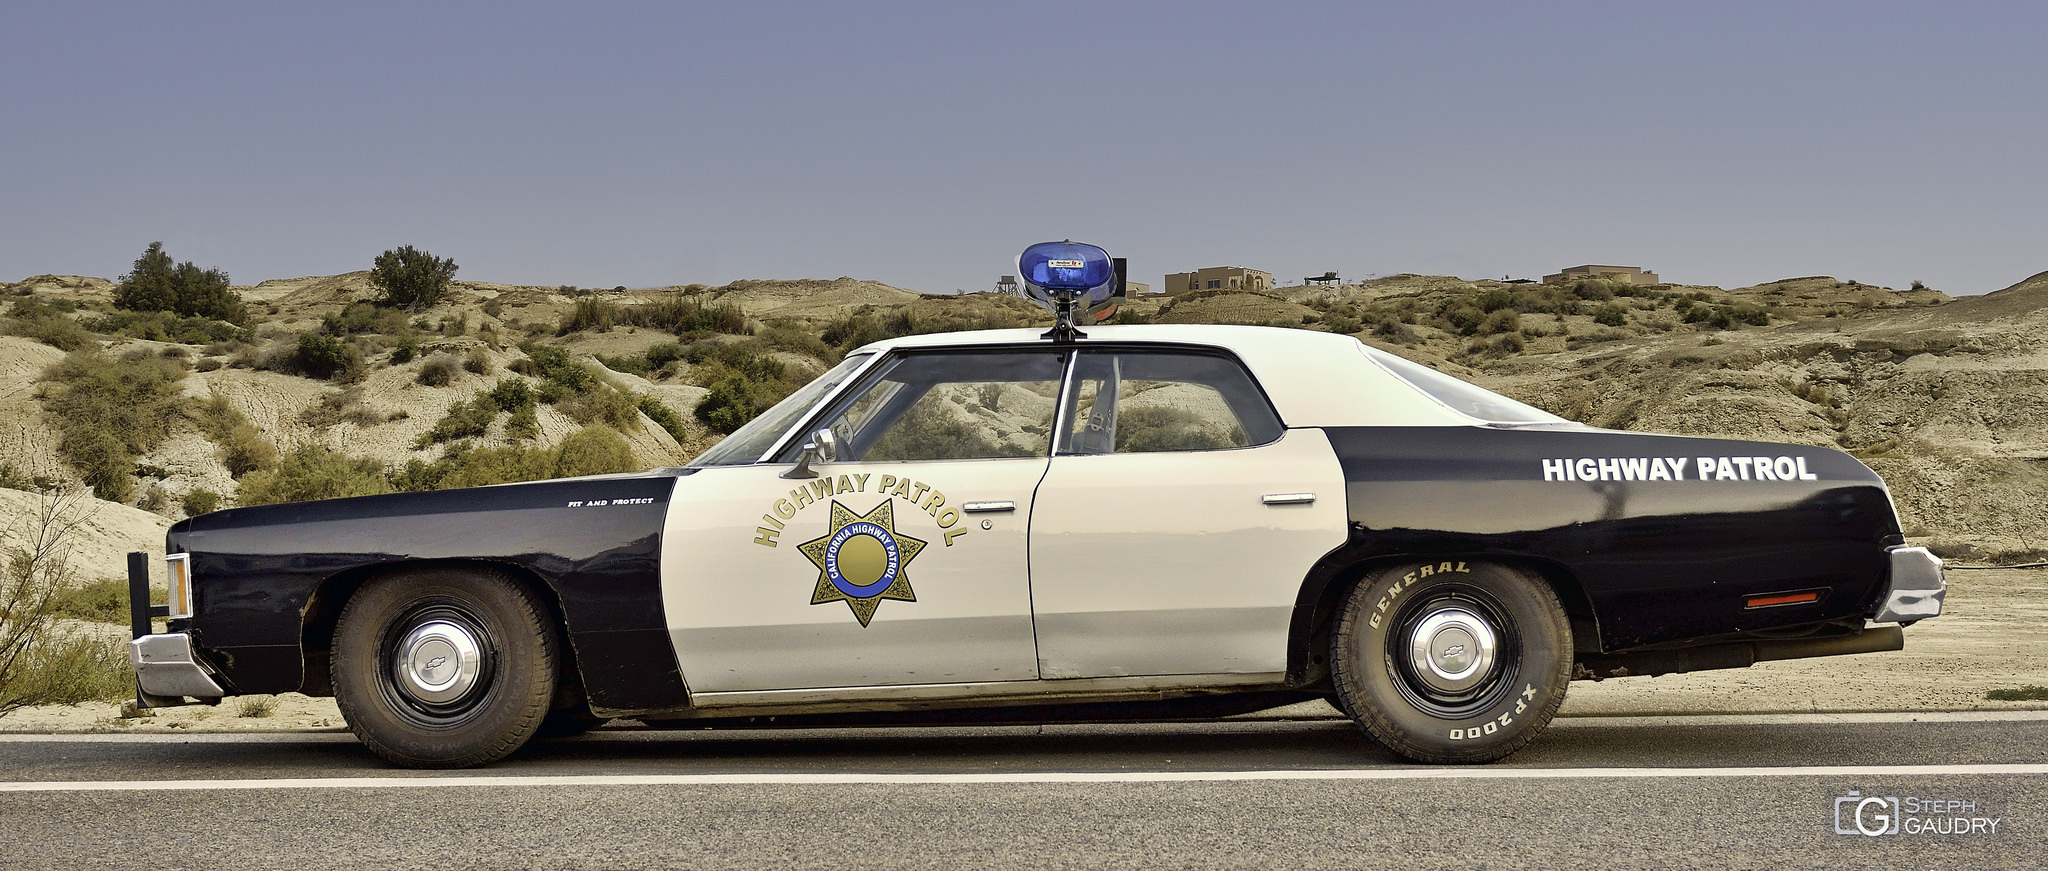 California highway patrol - pit and protect [Click to start slideshow]